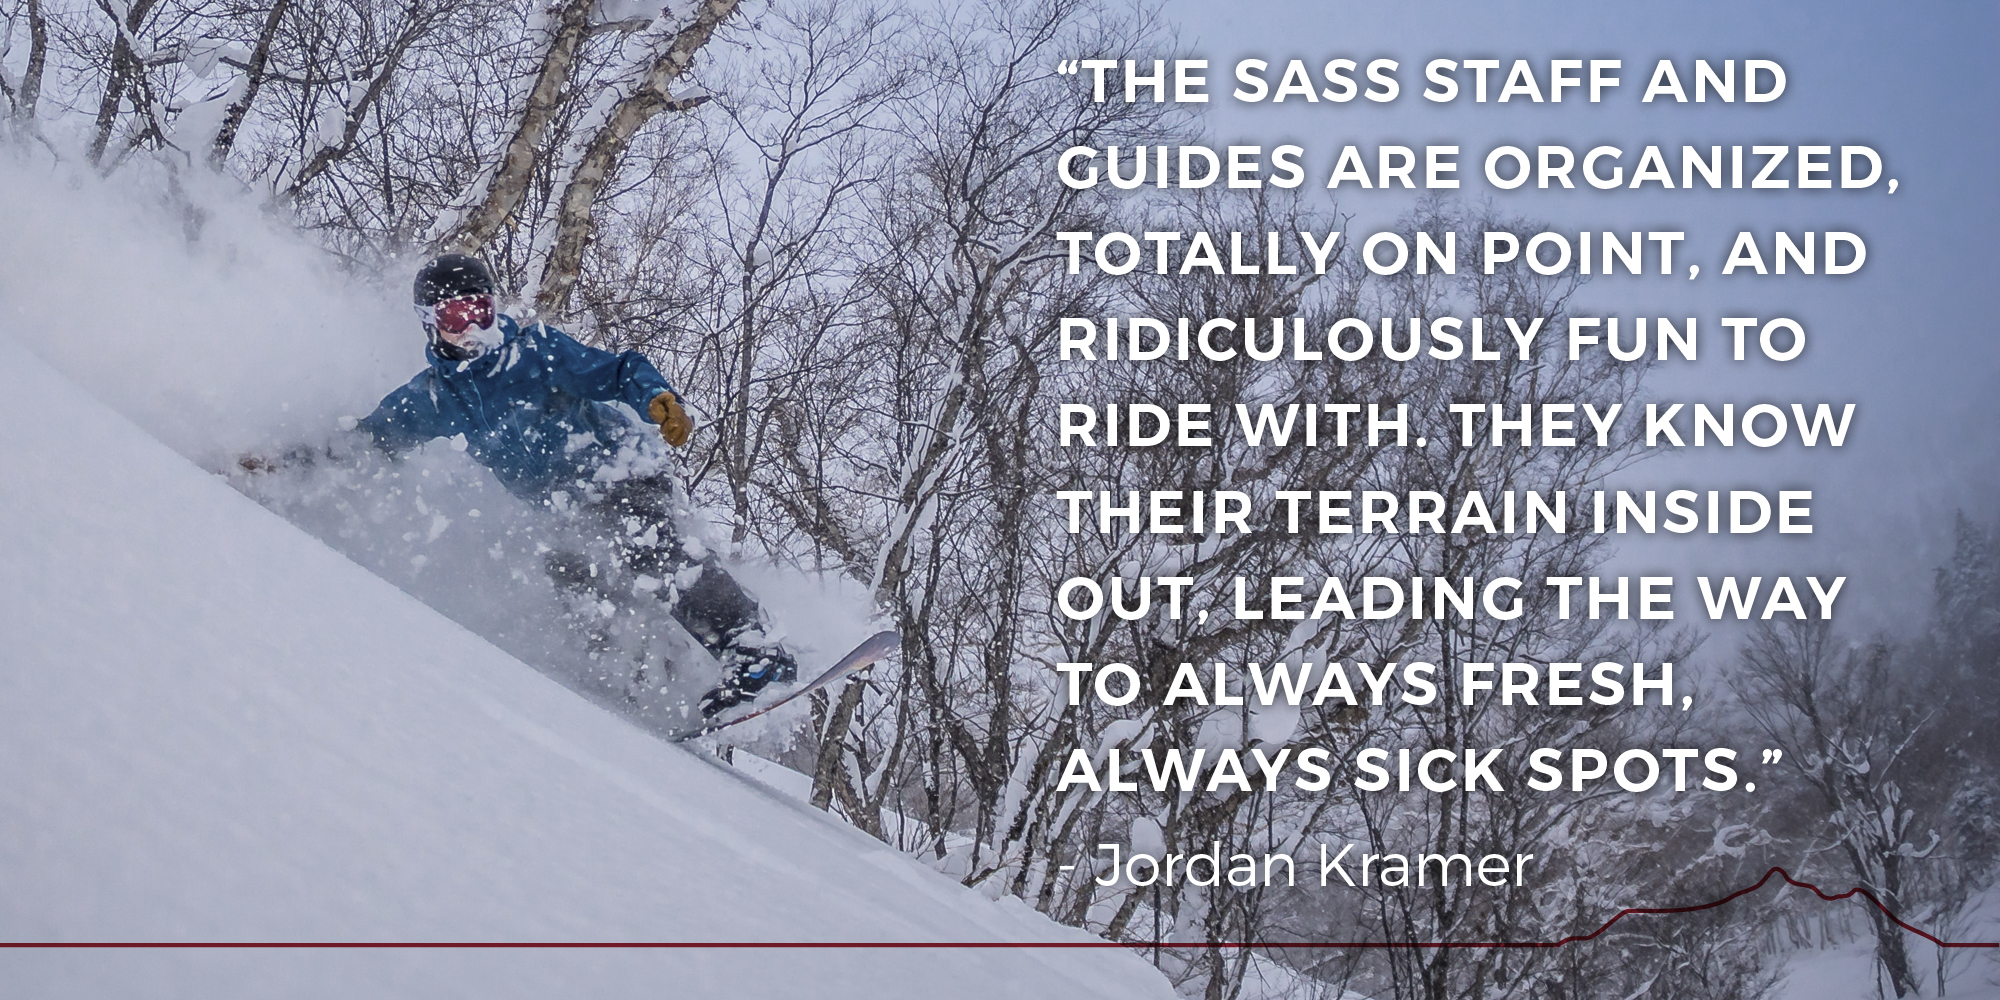 The SASS staff and guides are organized, totally on point, and ridiculously fun to ride with. They know their terrain inside out, leading the way to always fresh, always sick spots. -- Jordan Kramer